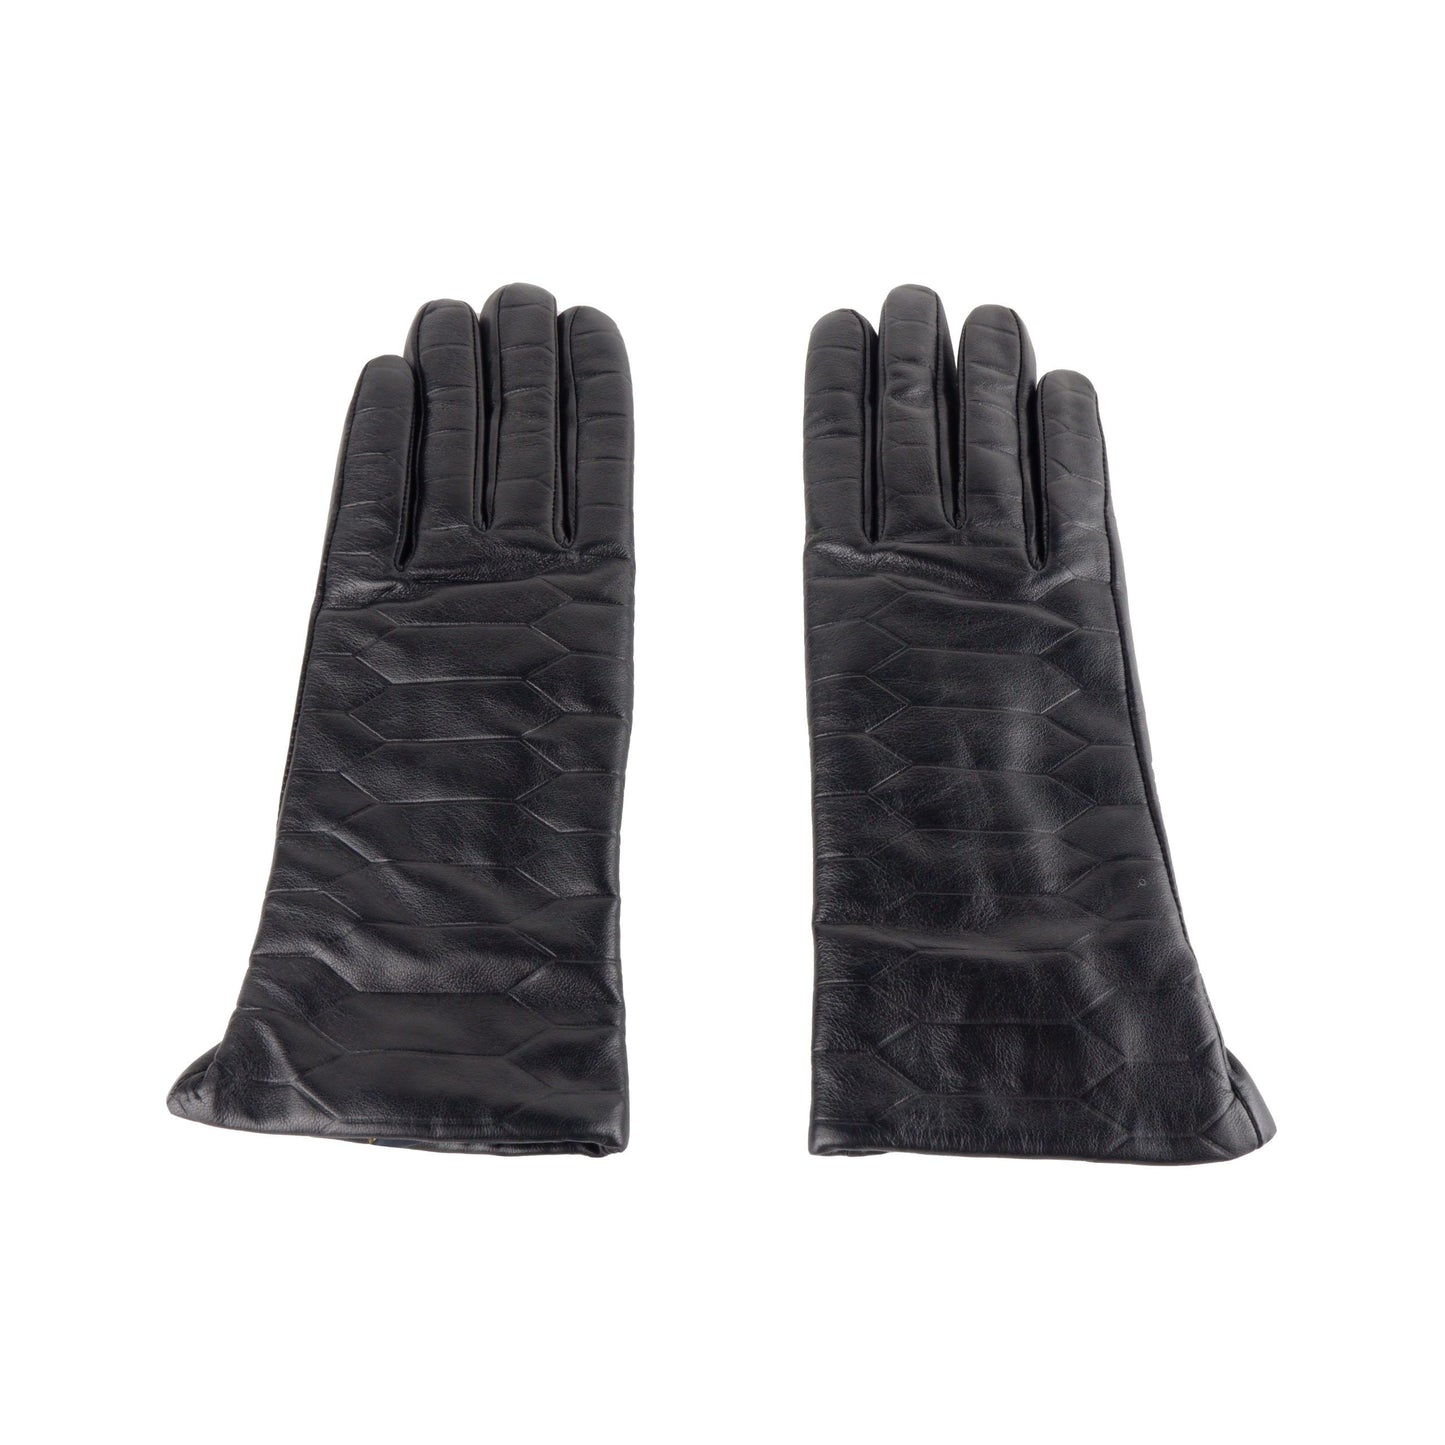 Cavalli Class Black Ladies Gloves - Designed by Cavalli Class Available to Buy at a Discounted Price on Moon Behind The Hill Online Designer Discount Store